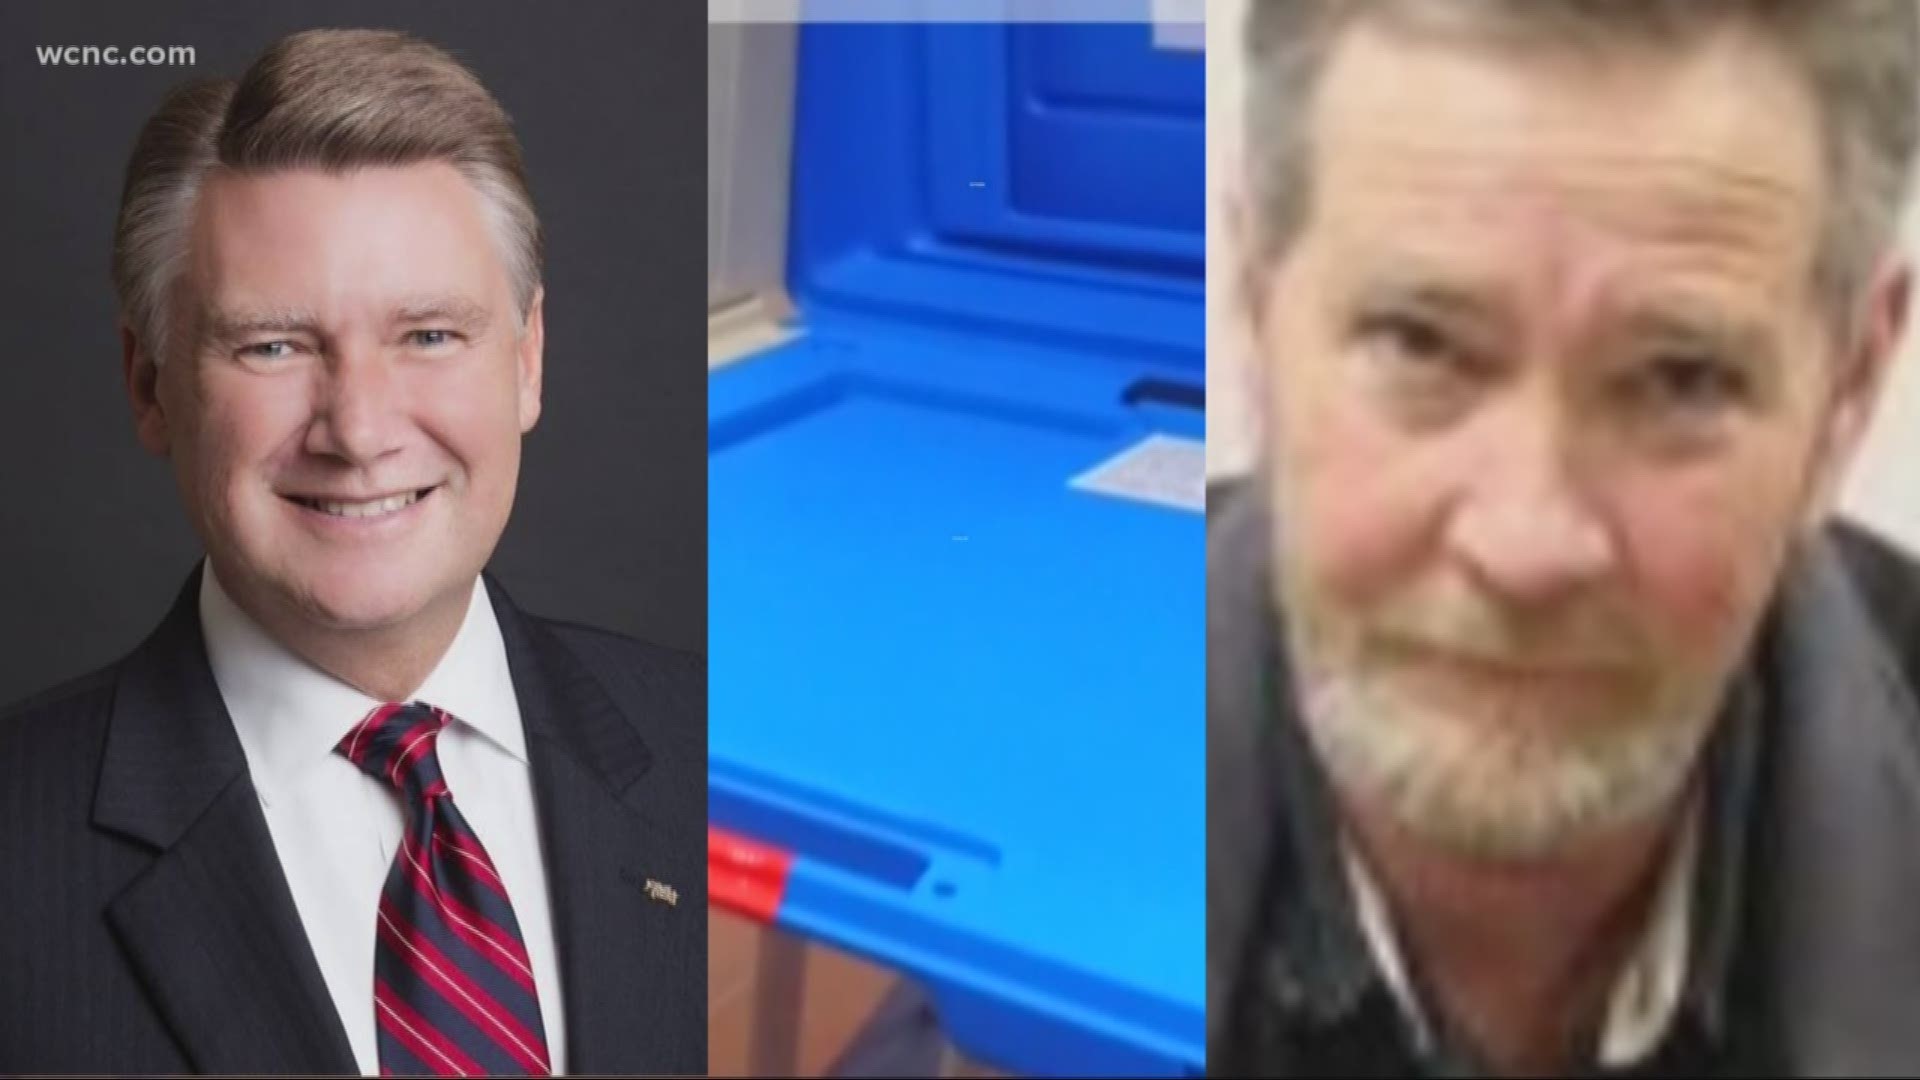 It's possible we will hear from the Republican for the first time since questions were raised about possible absentee ballot fraud in North Carolina's 9th district.